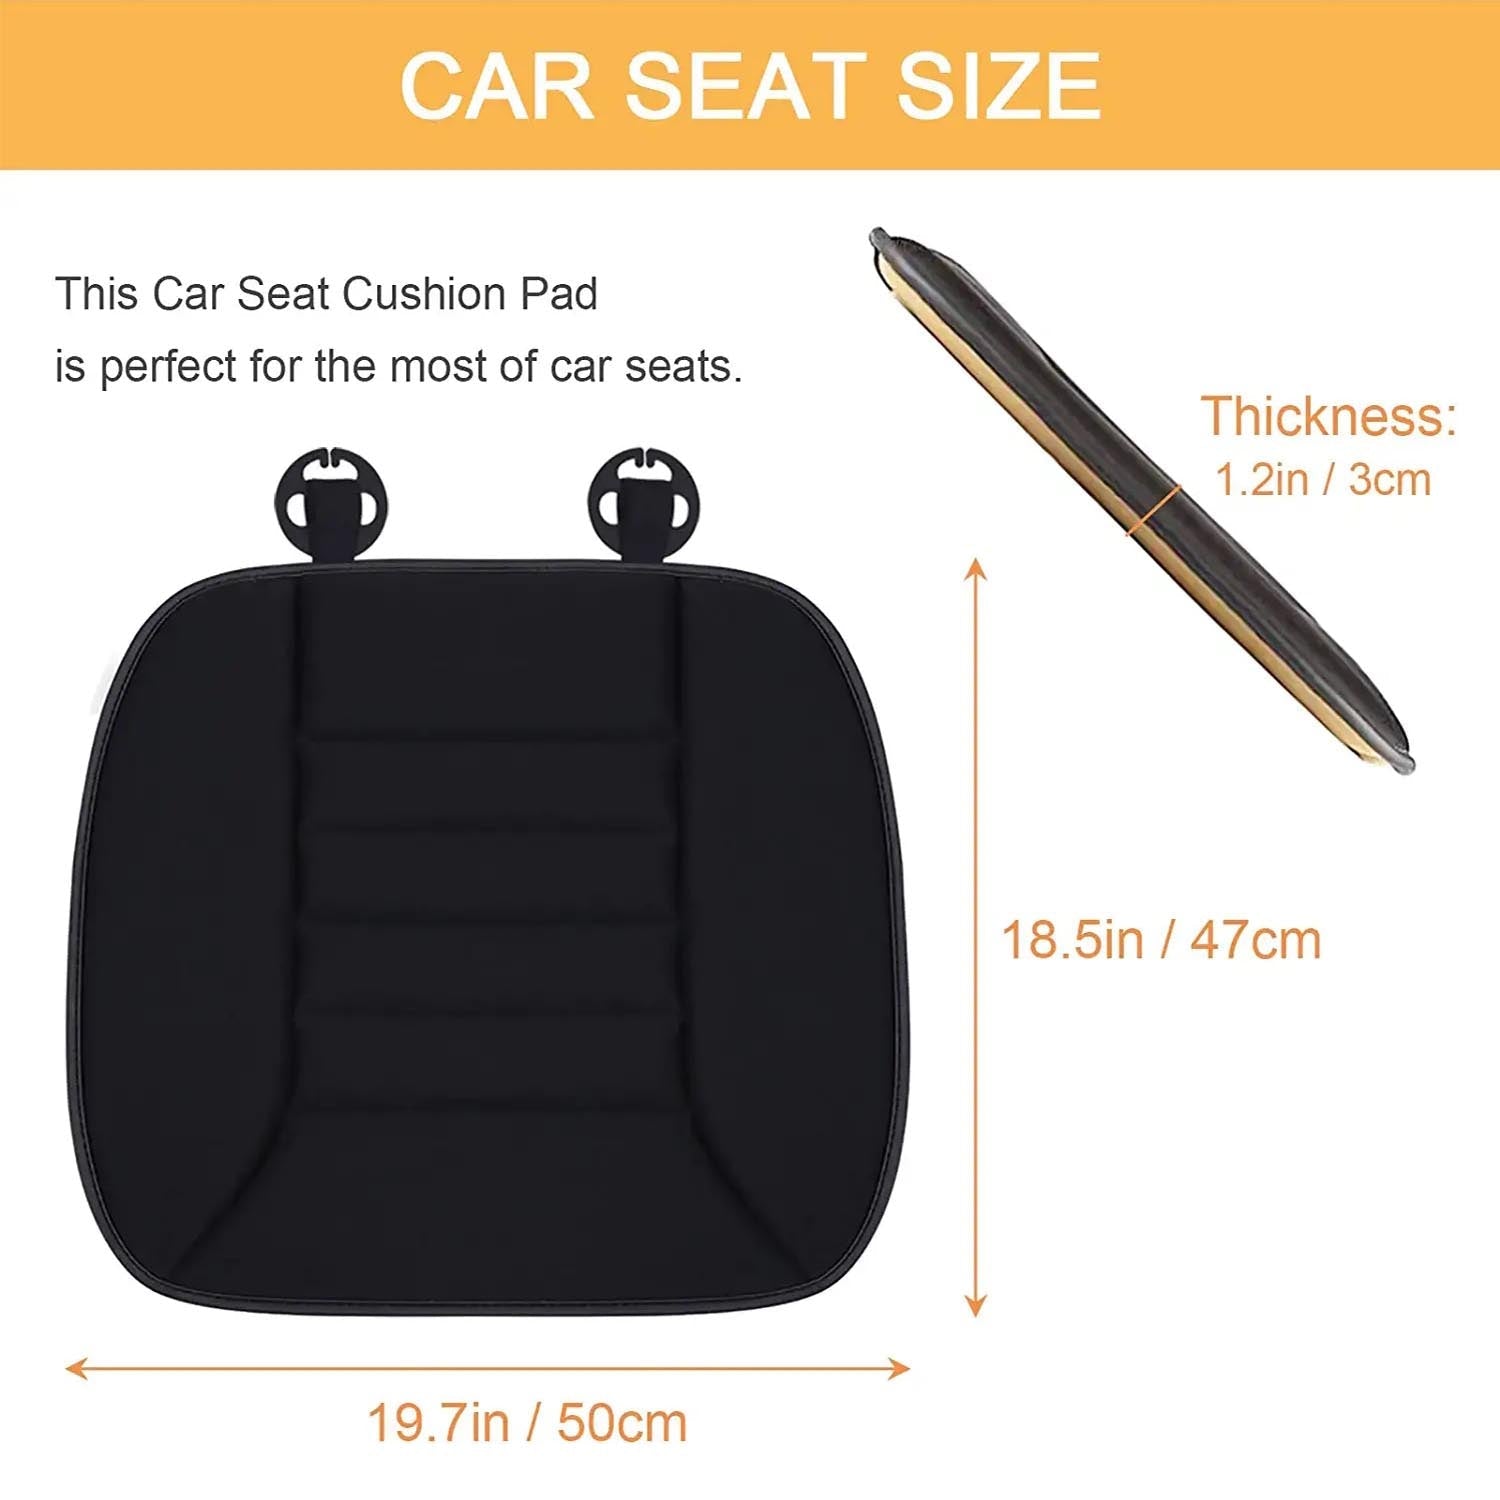 Car Seat Cushion with 1.2inch Comfort Memory Foam, Custom Logo For Your Cars, Seat Cushion for Car and Office Chair VE19989 - Delicate Leather